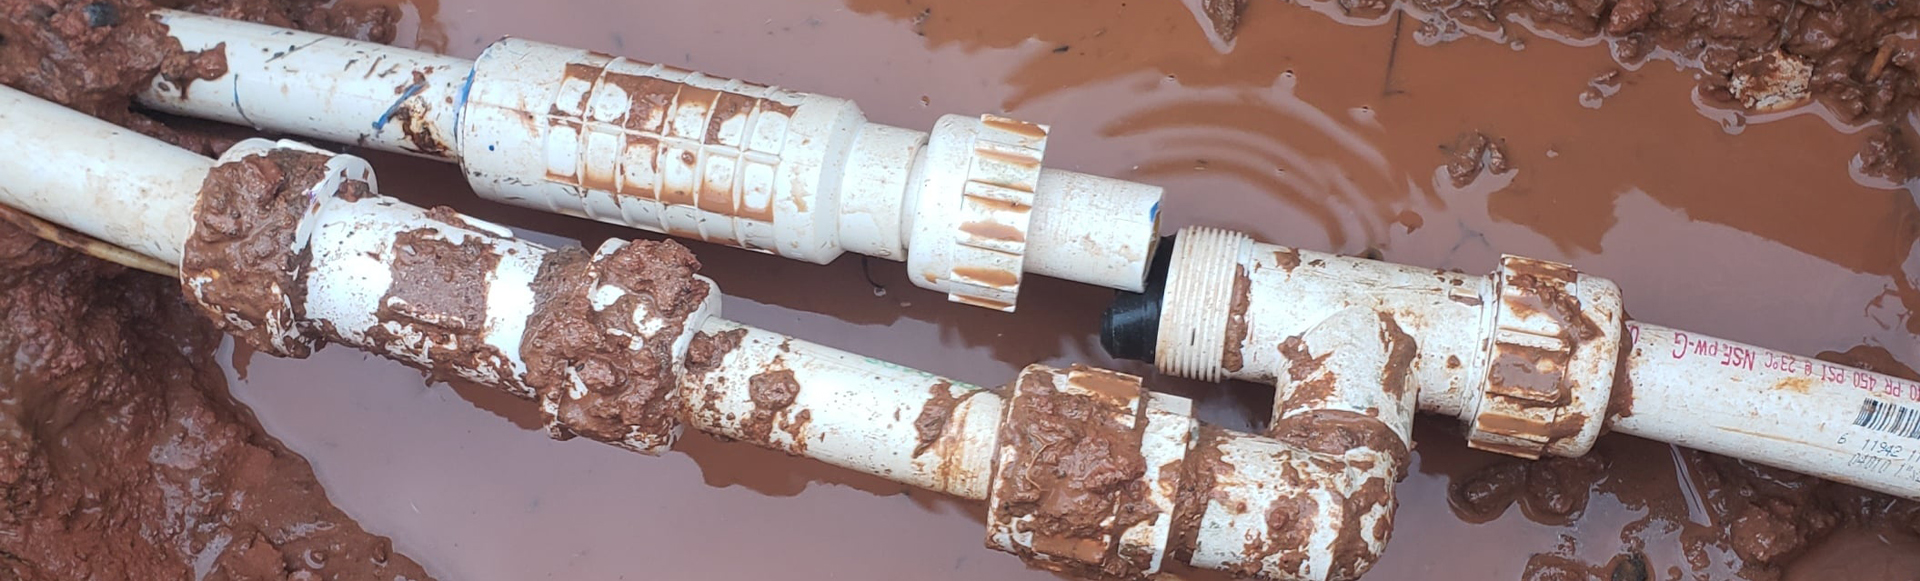 Lead lines, water loss, and leak administration – OH MY! Webinar with NRWA